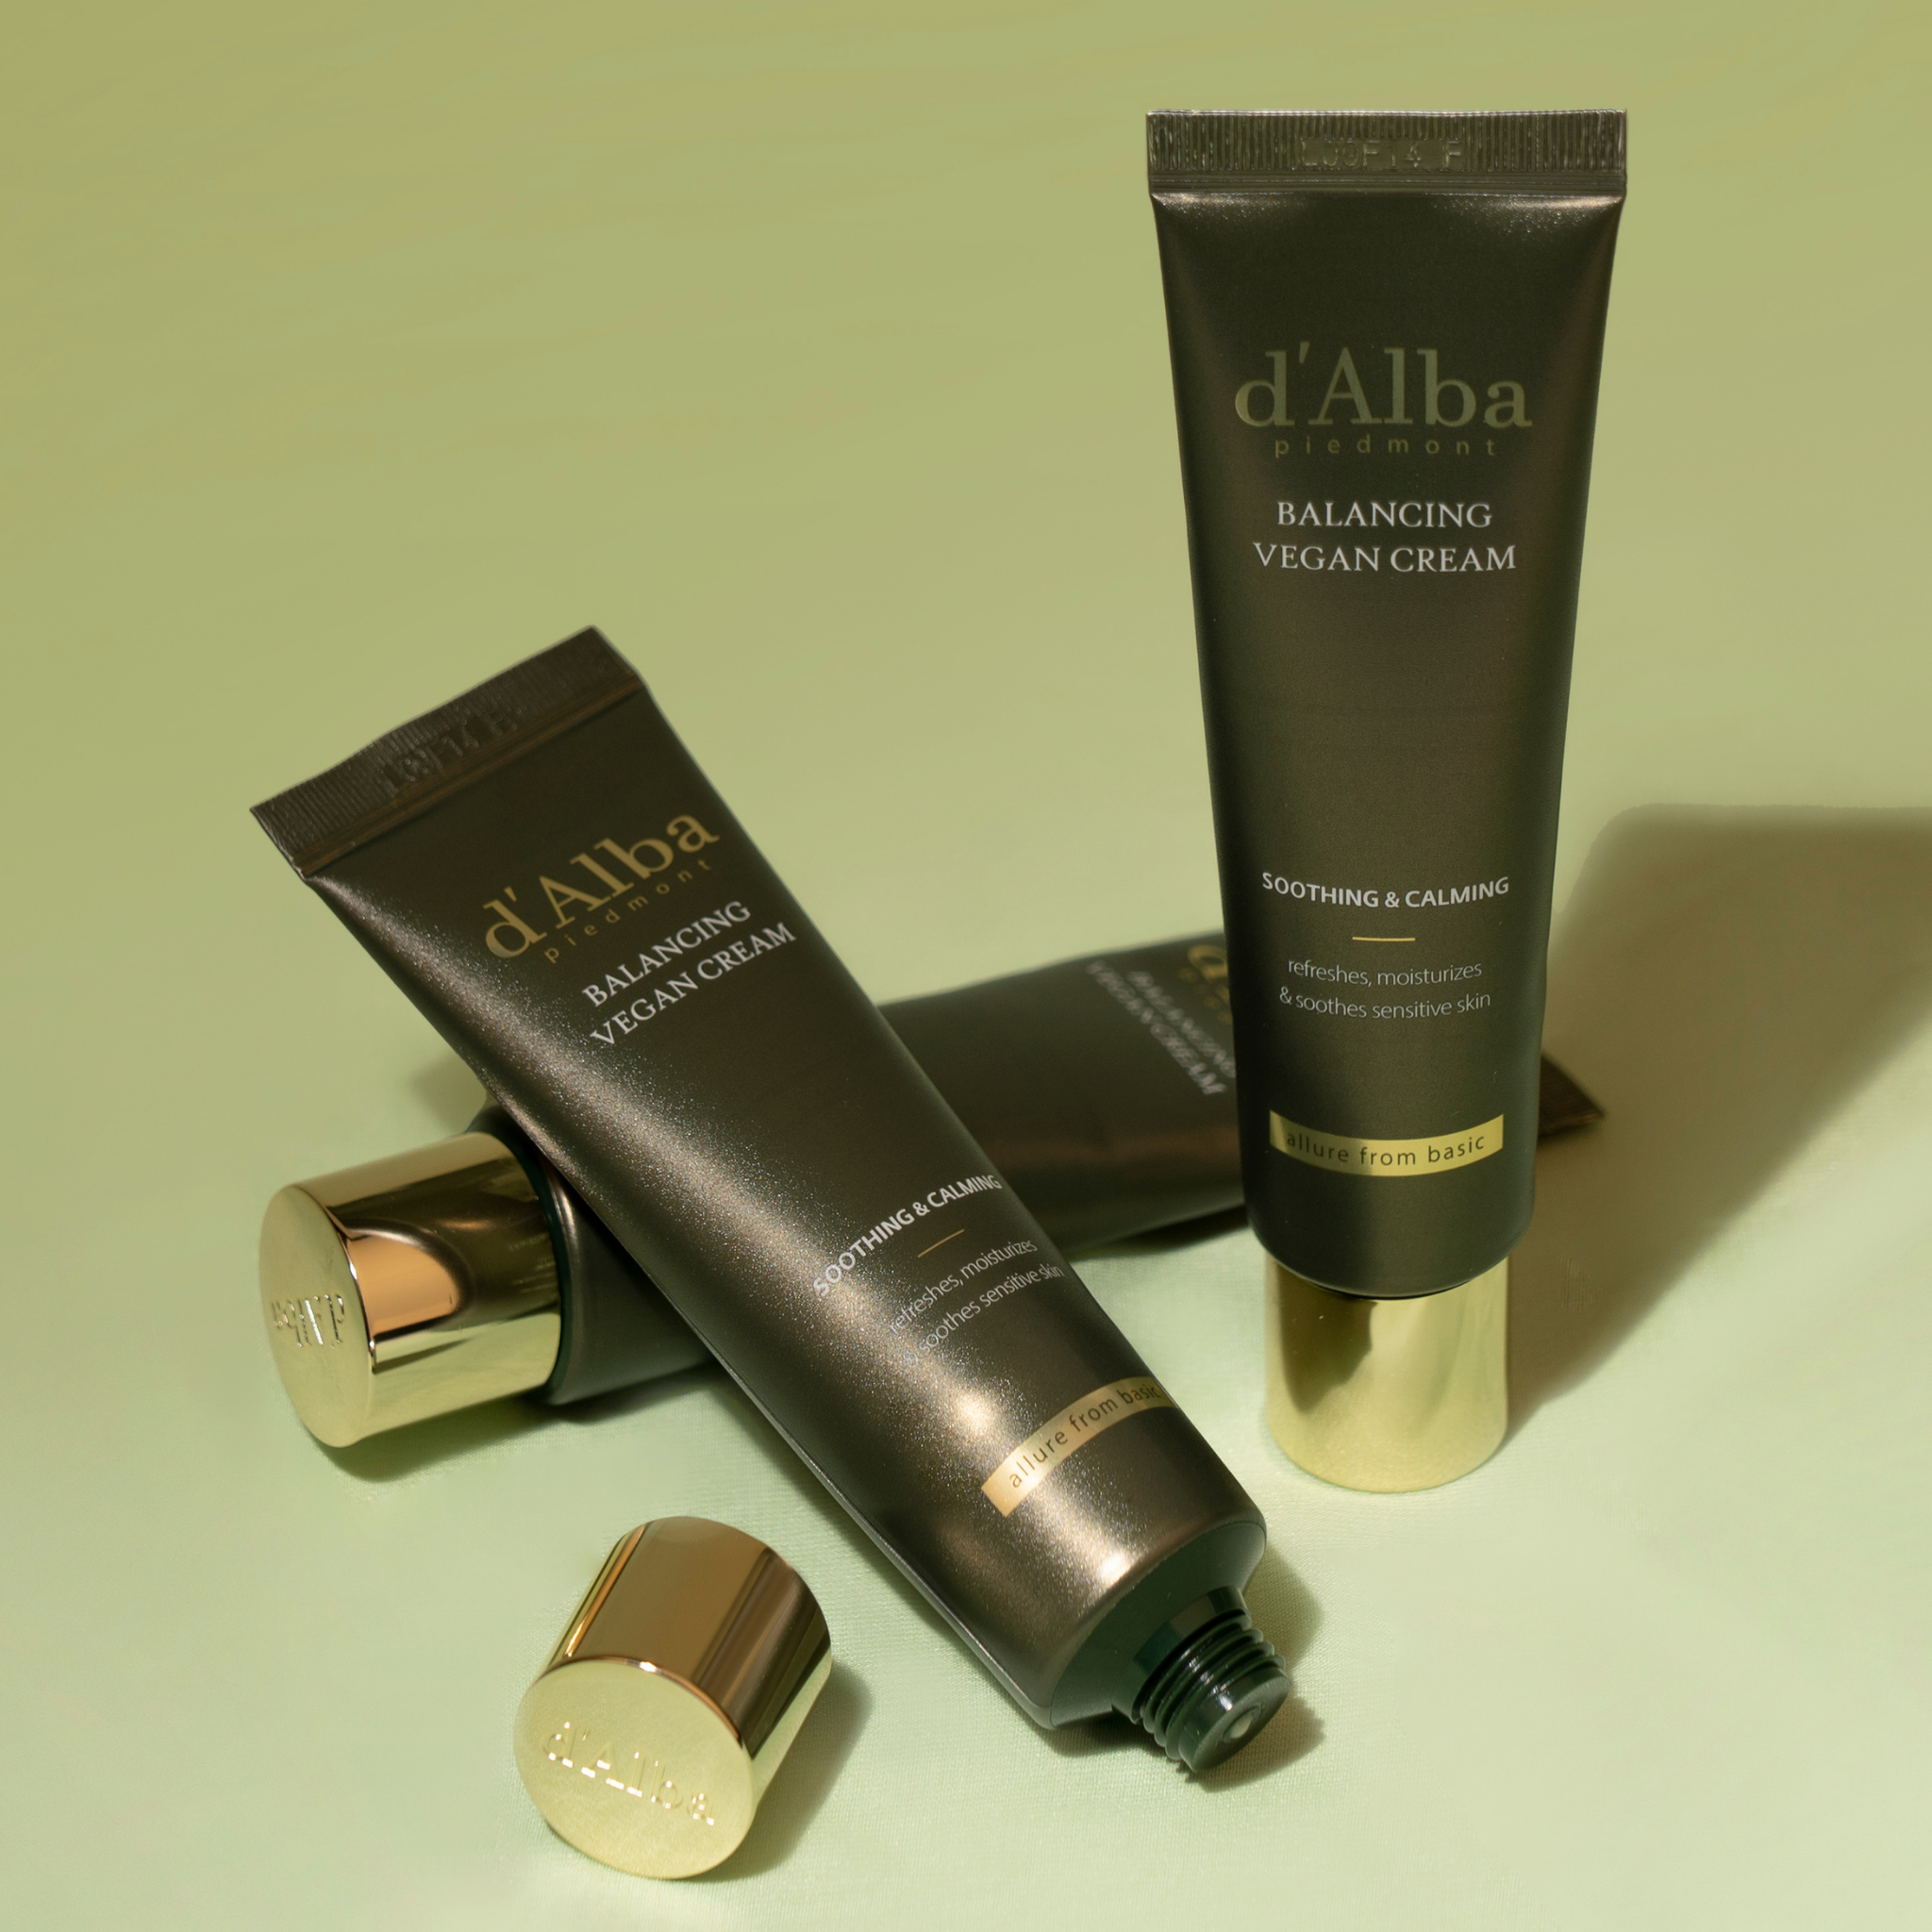 D'ALBA Mild Skin Balancing Vegan Cream (55ml) flat lay of the product with opened and closed lids